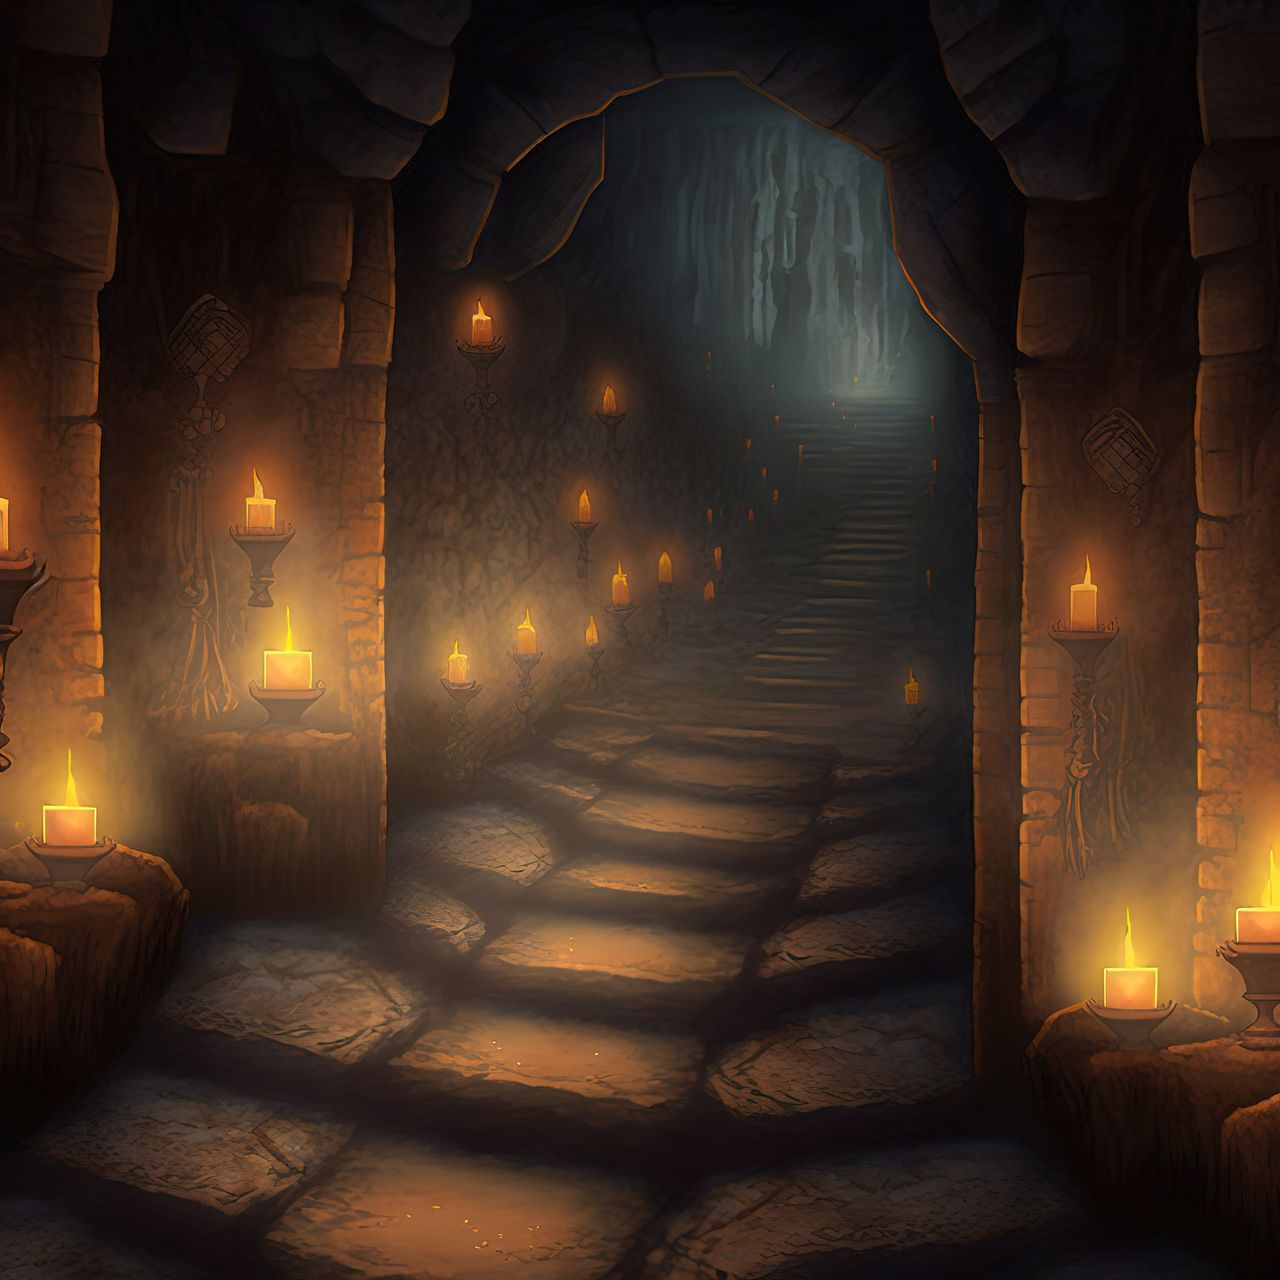 Candles illuminate the passage in the dungeon along the stone path. There are hollows in the walls and candles in the hollows. At the end of the passage you can see daylight. 3D rendering Dungeon Old Mystery Entrance Cave Wall Construction Light Architecture Floor Concrete Stone Castle Candle Medieval Brick Structure Candles Mine Fortress Corridor Tunnel Ancient Basement Cellar Amphitheatre Arch Underground Cavern Speleology History Past Fort Historic Passage Obsolete Inside 3D Illustration Dark Scary